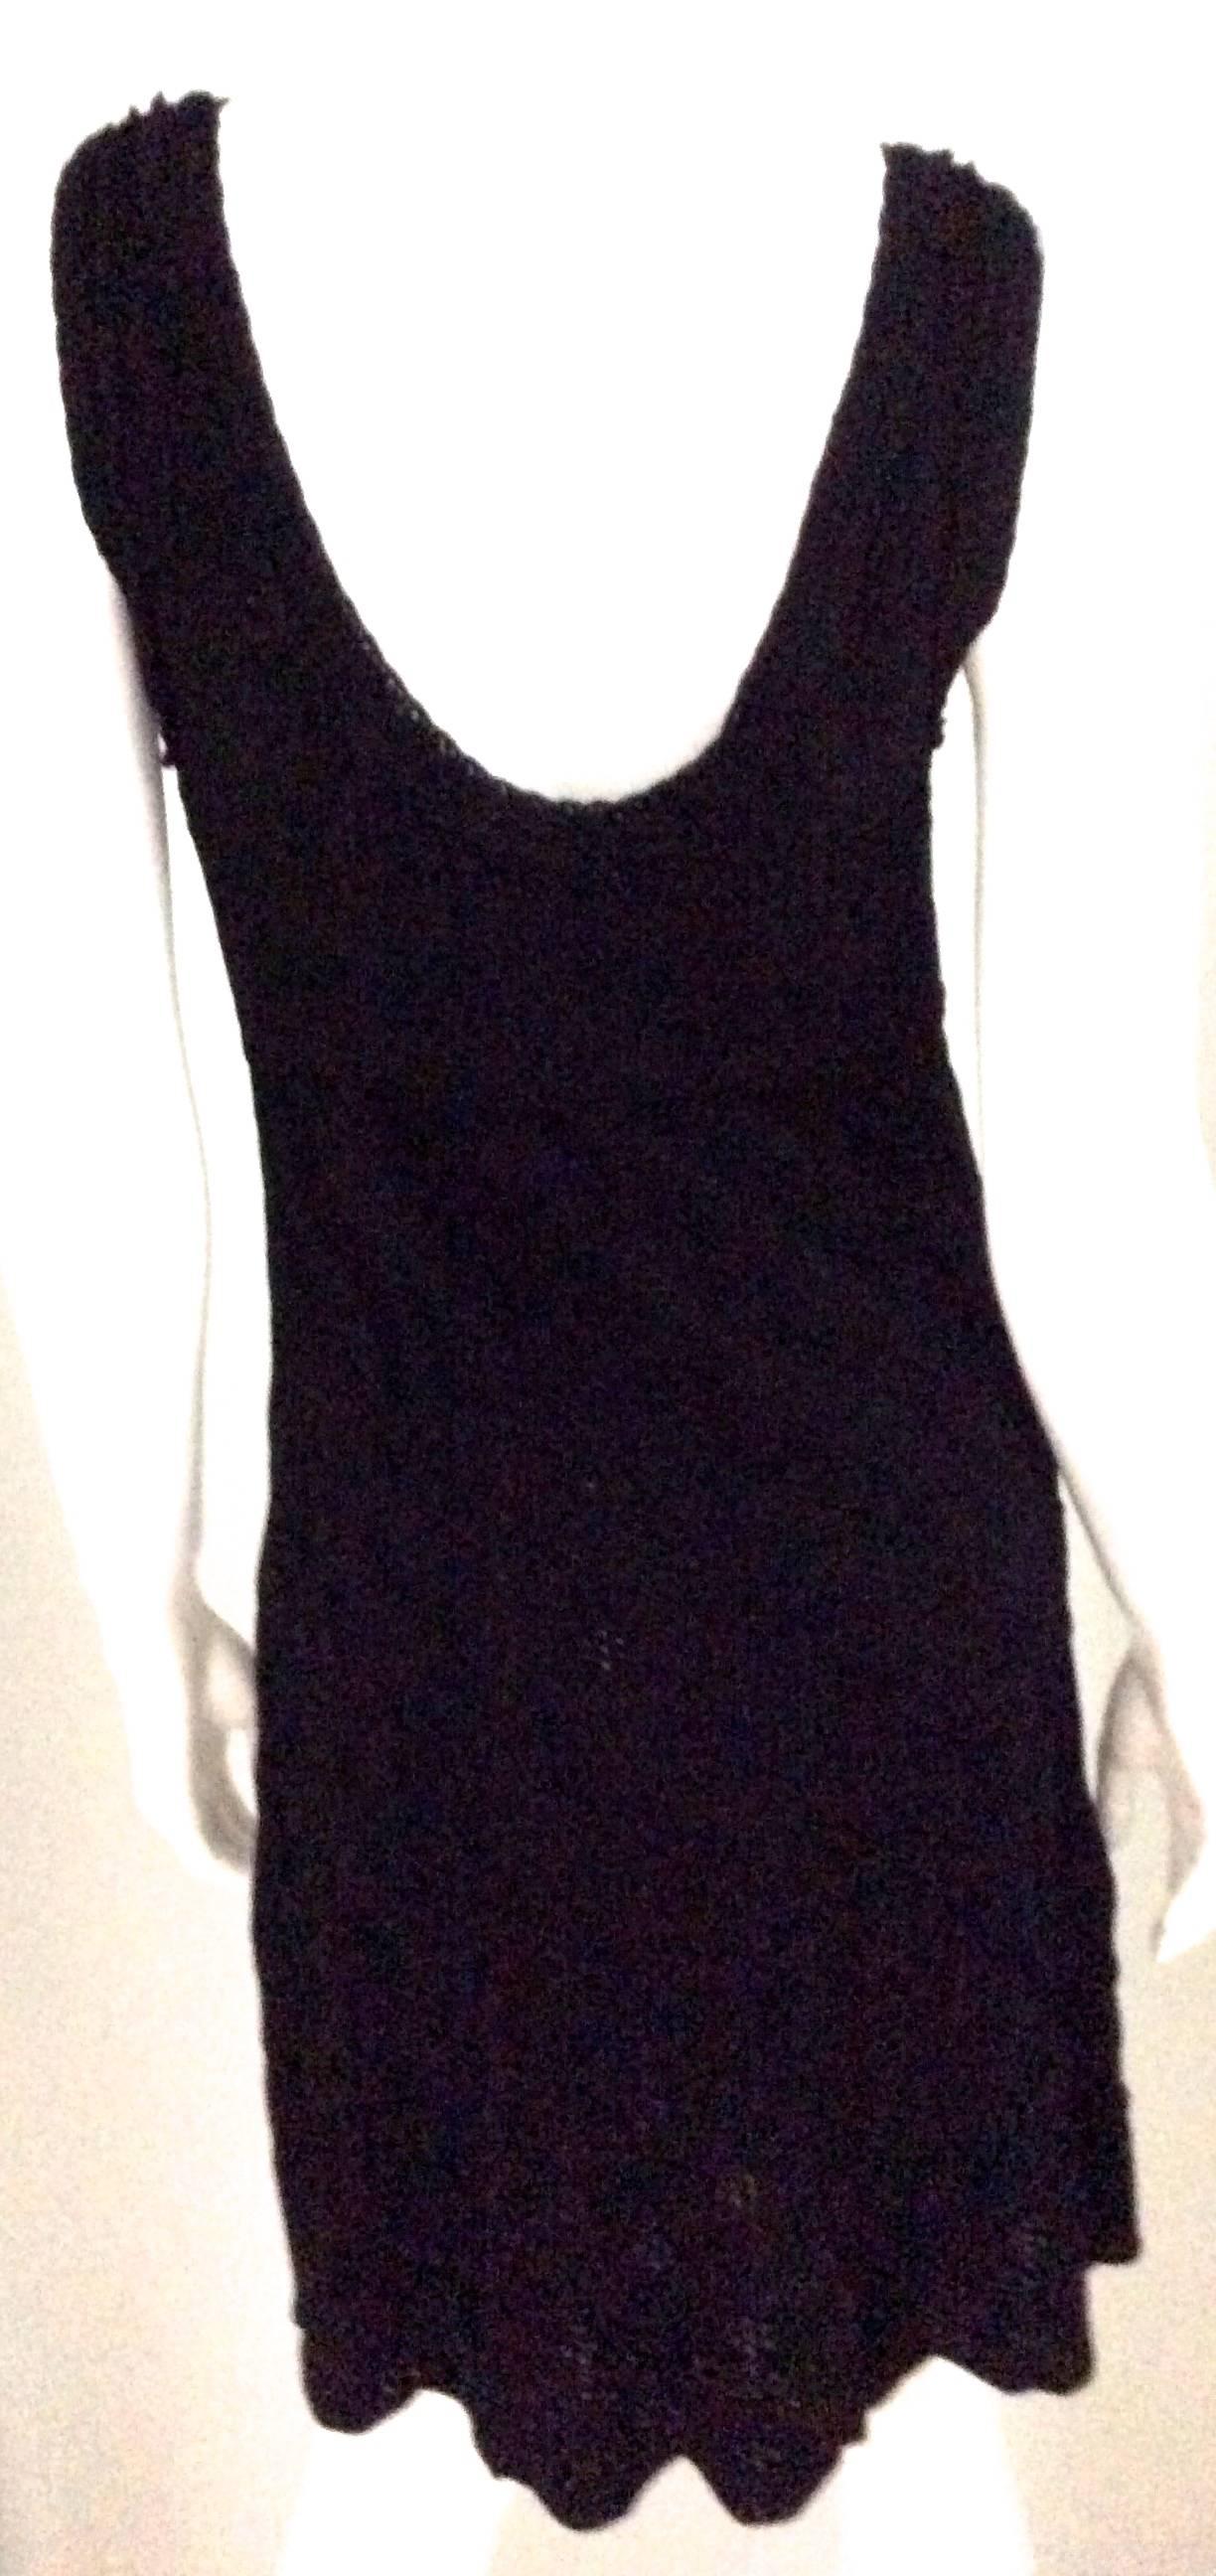 Chanel Black Dress - Size 40  In Excellent Condition For Sale In Boca Raton, FL